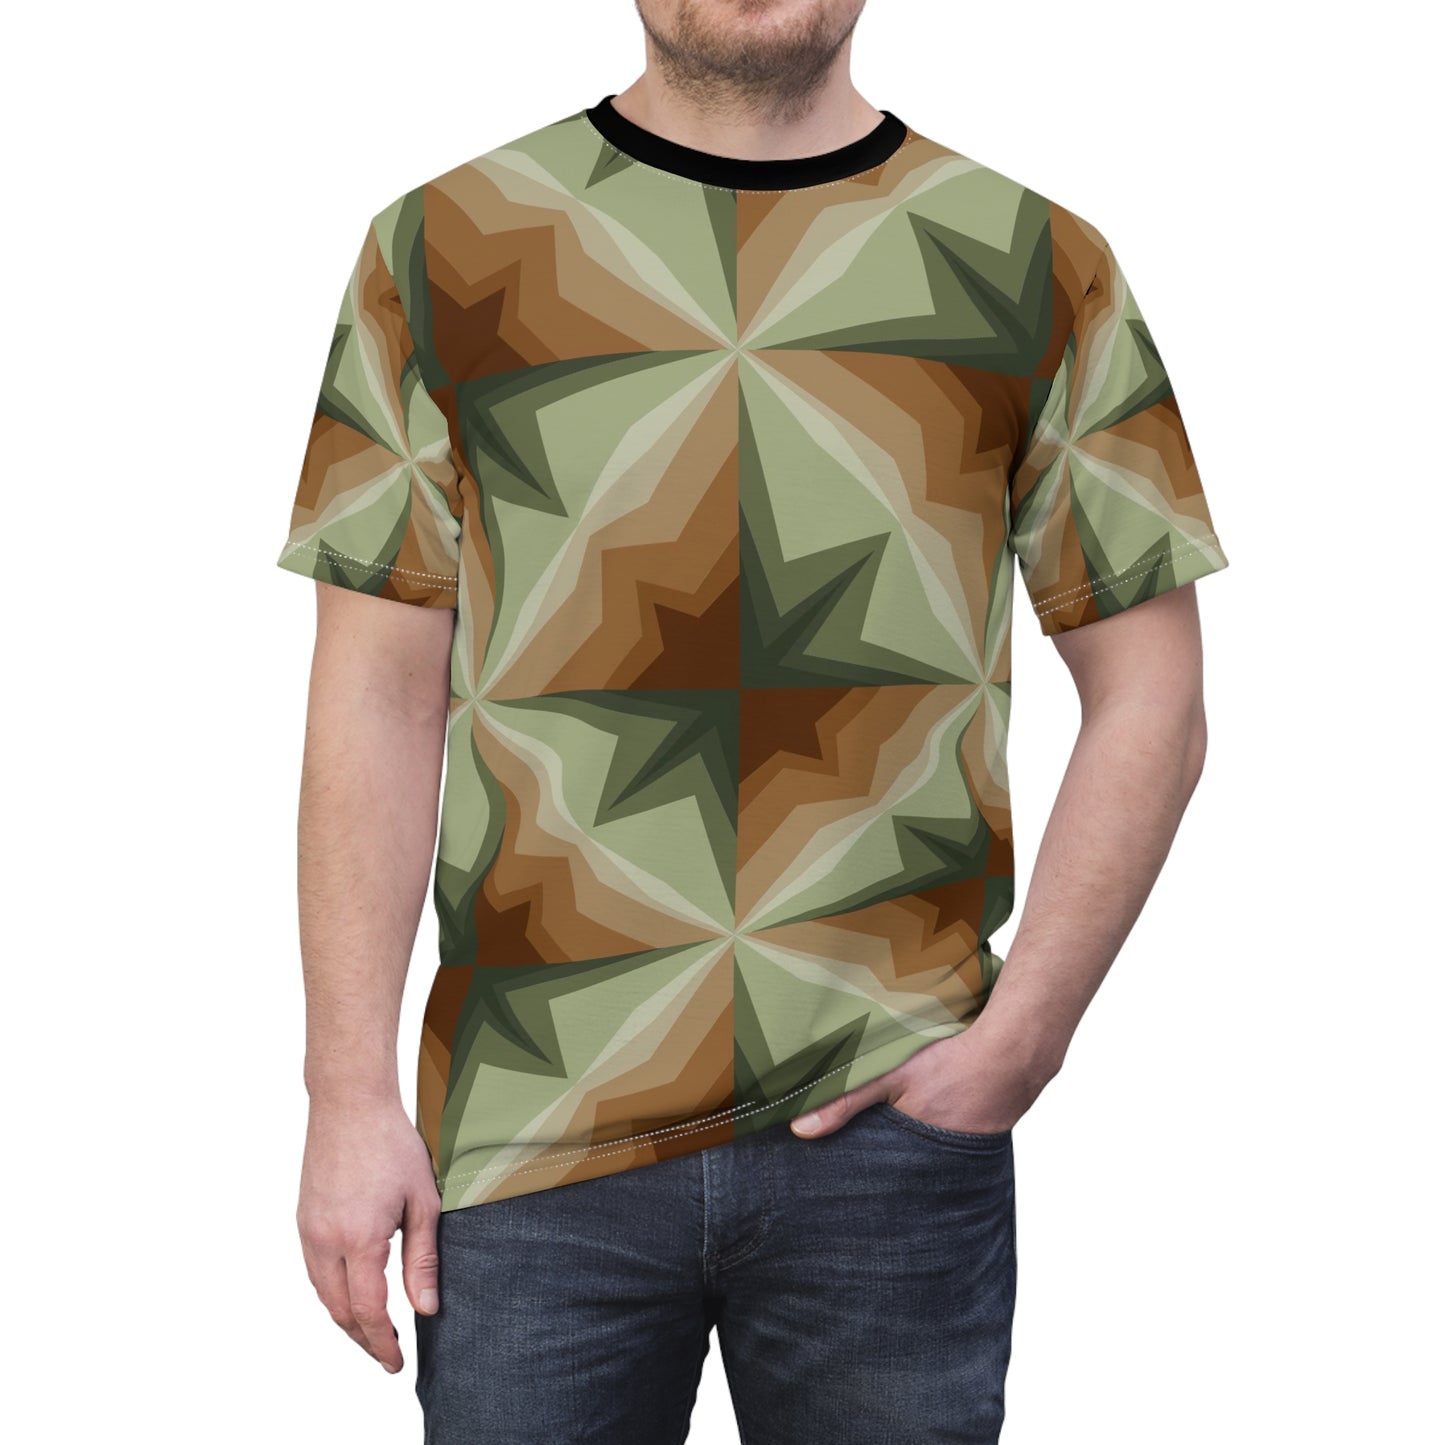 EARTH PATTERN 100101 - All Over Print - Unisex Cut & Sew Tee (AOP)